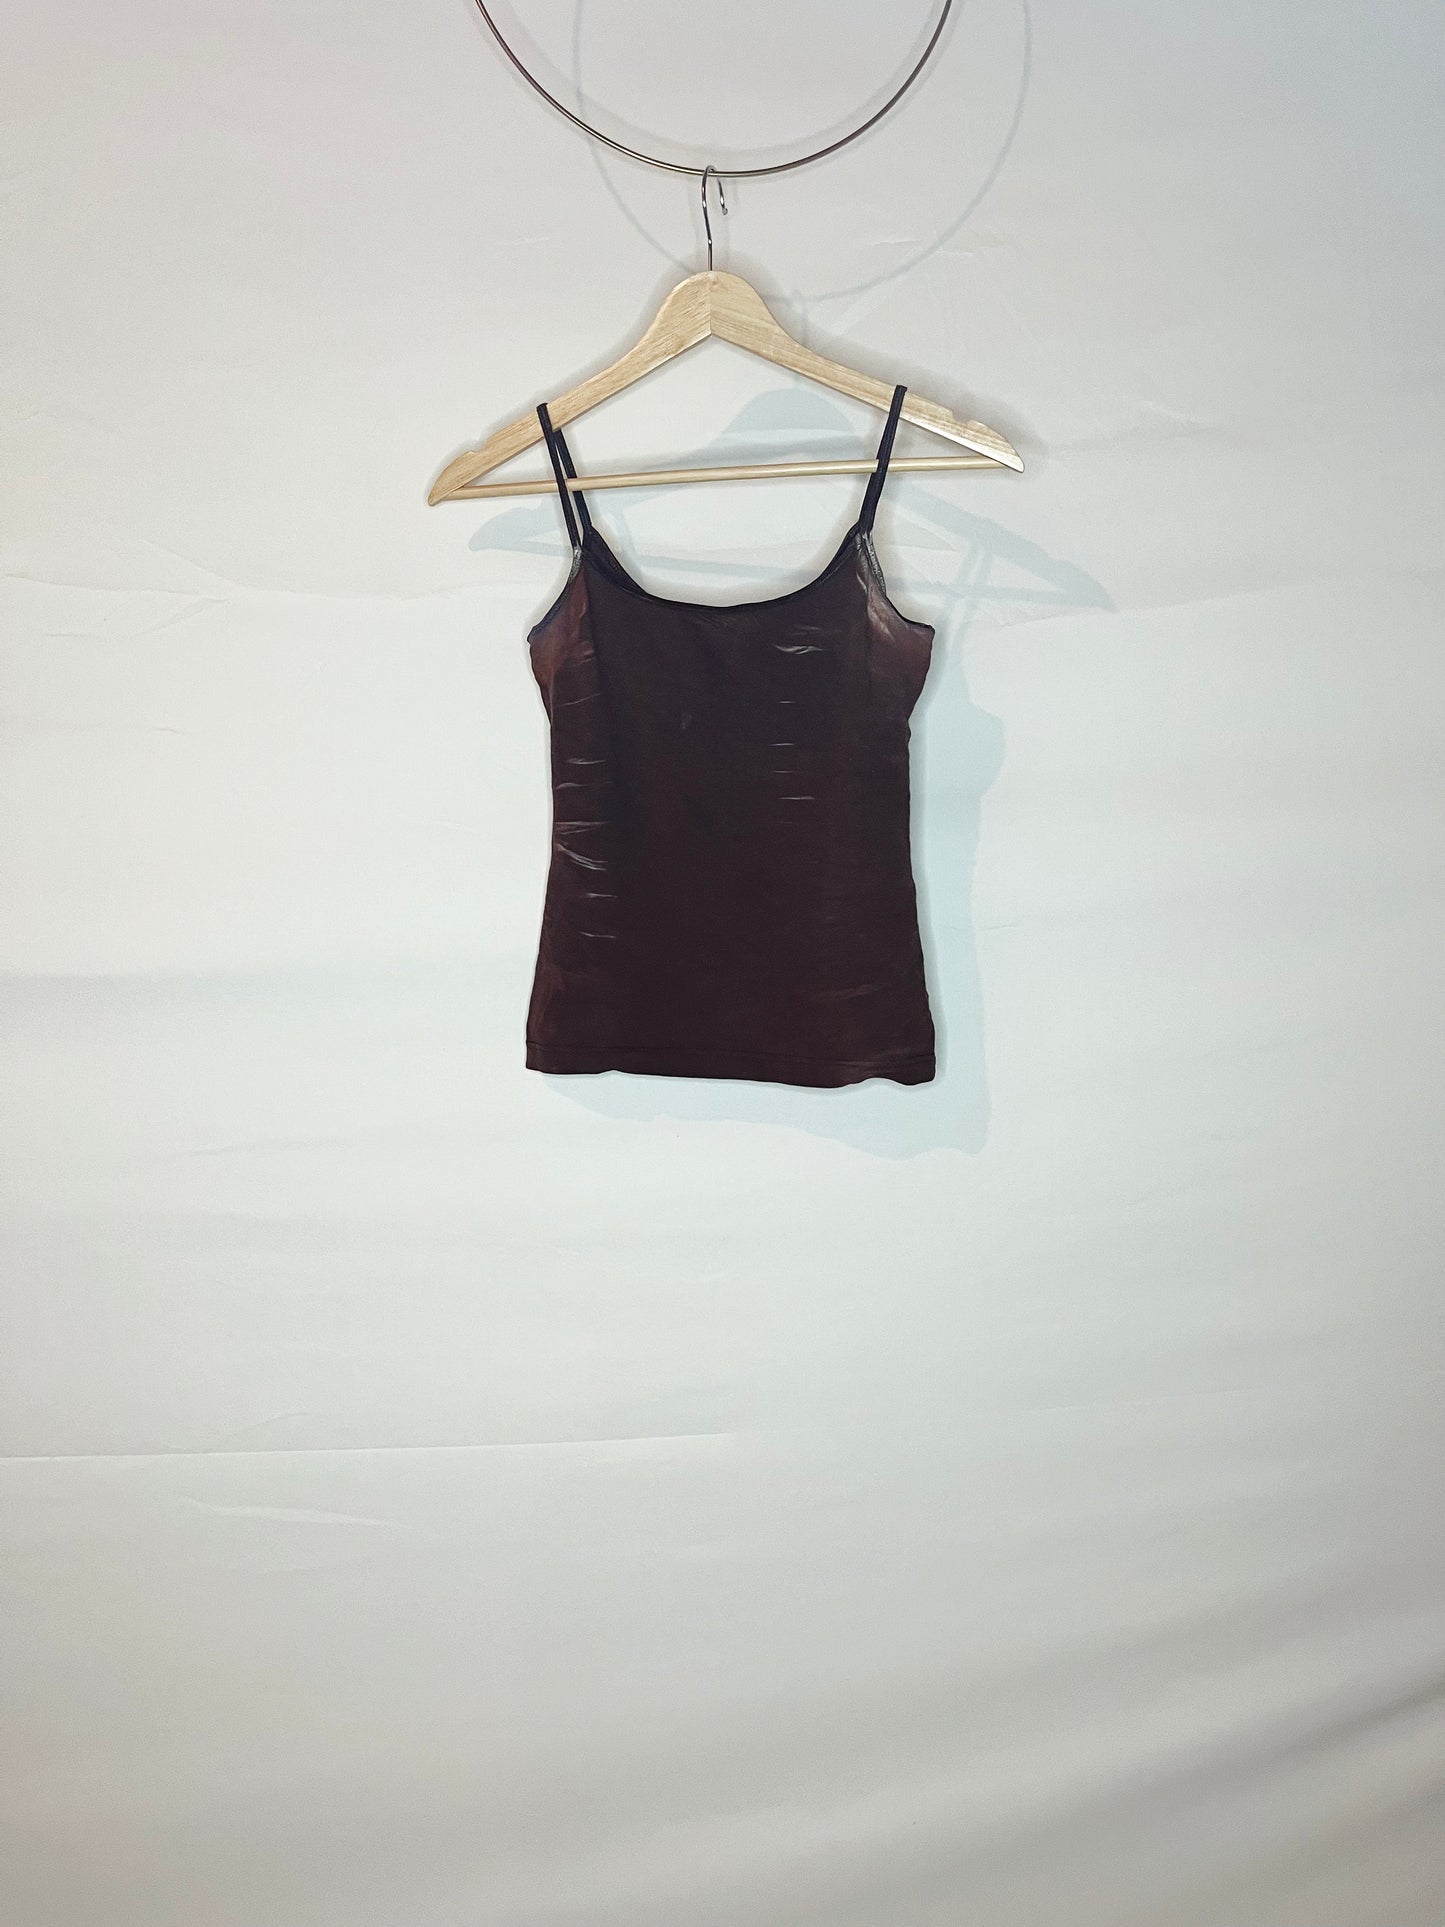 Brown Camisole